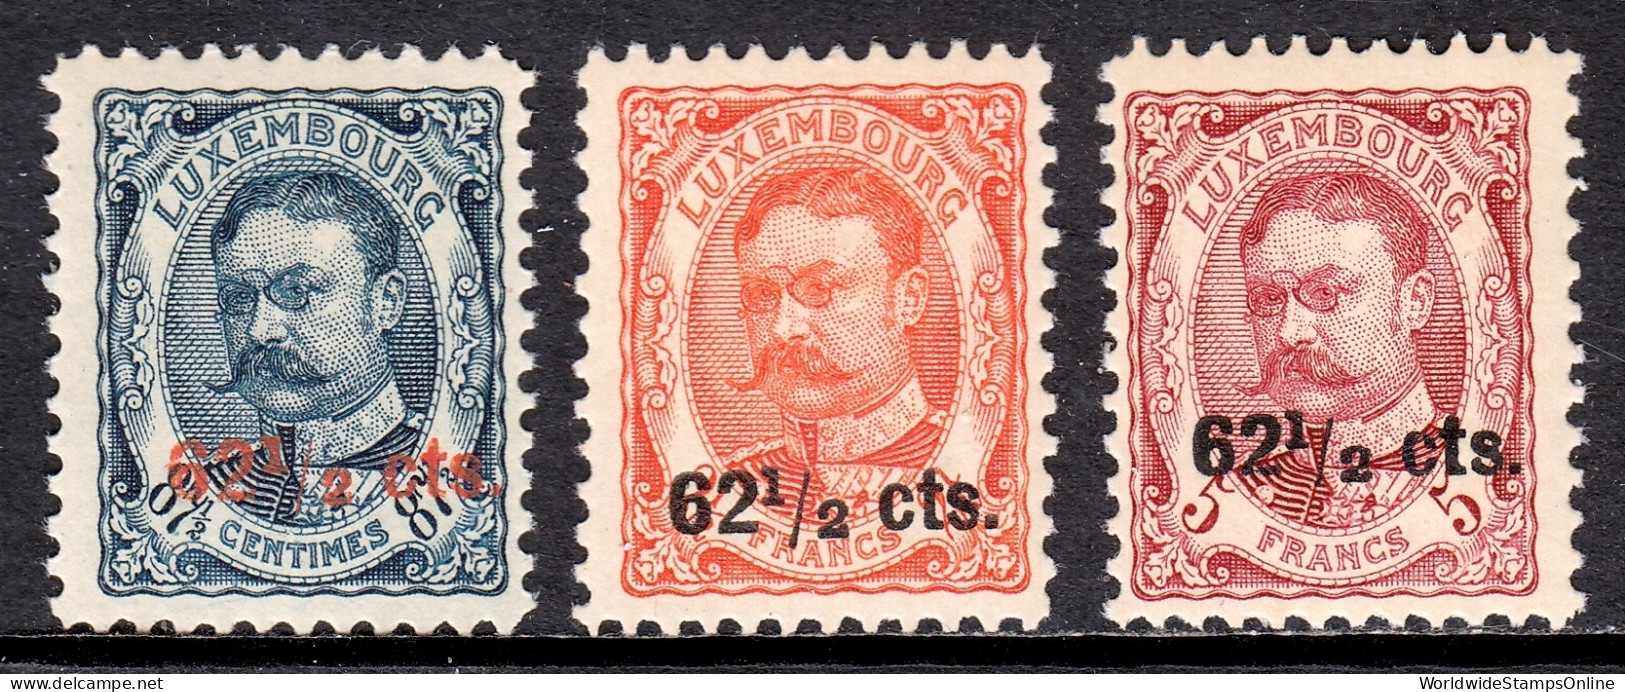 Luxembourg - Scott #94-96 - MNH/MH - #95 Is MH, Others MNH - SCV $12 - 1906 Guillermo IV